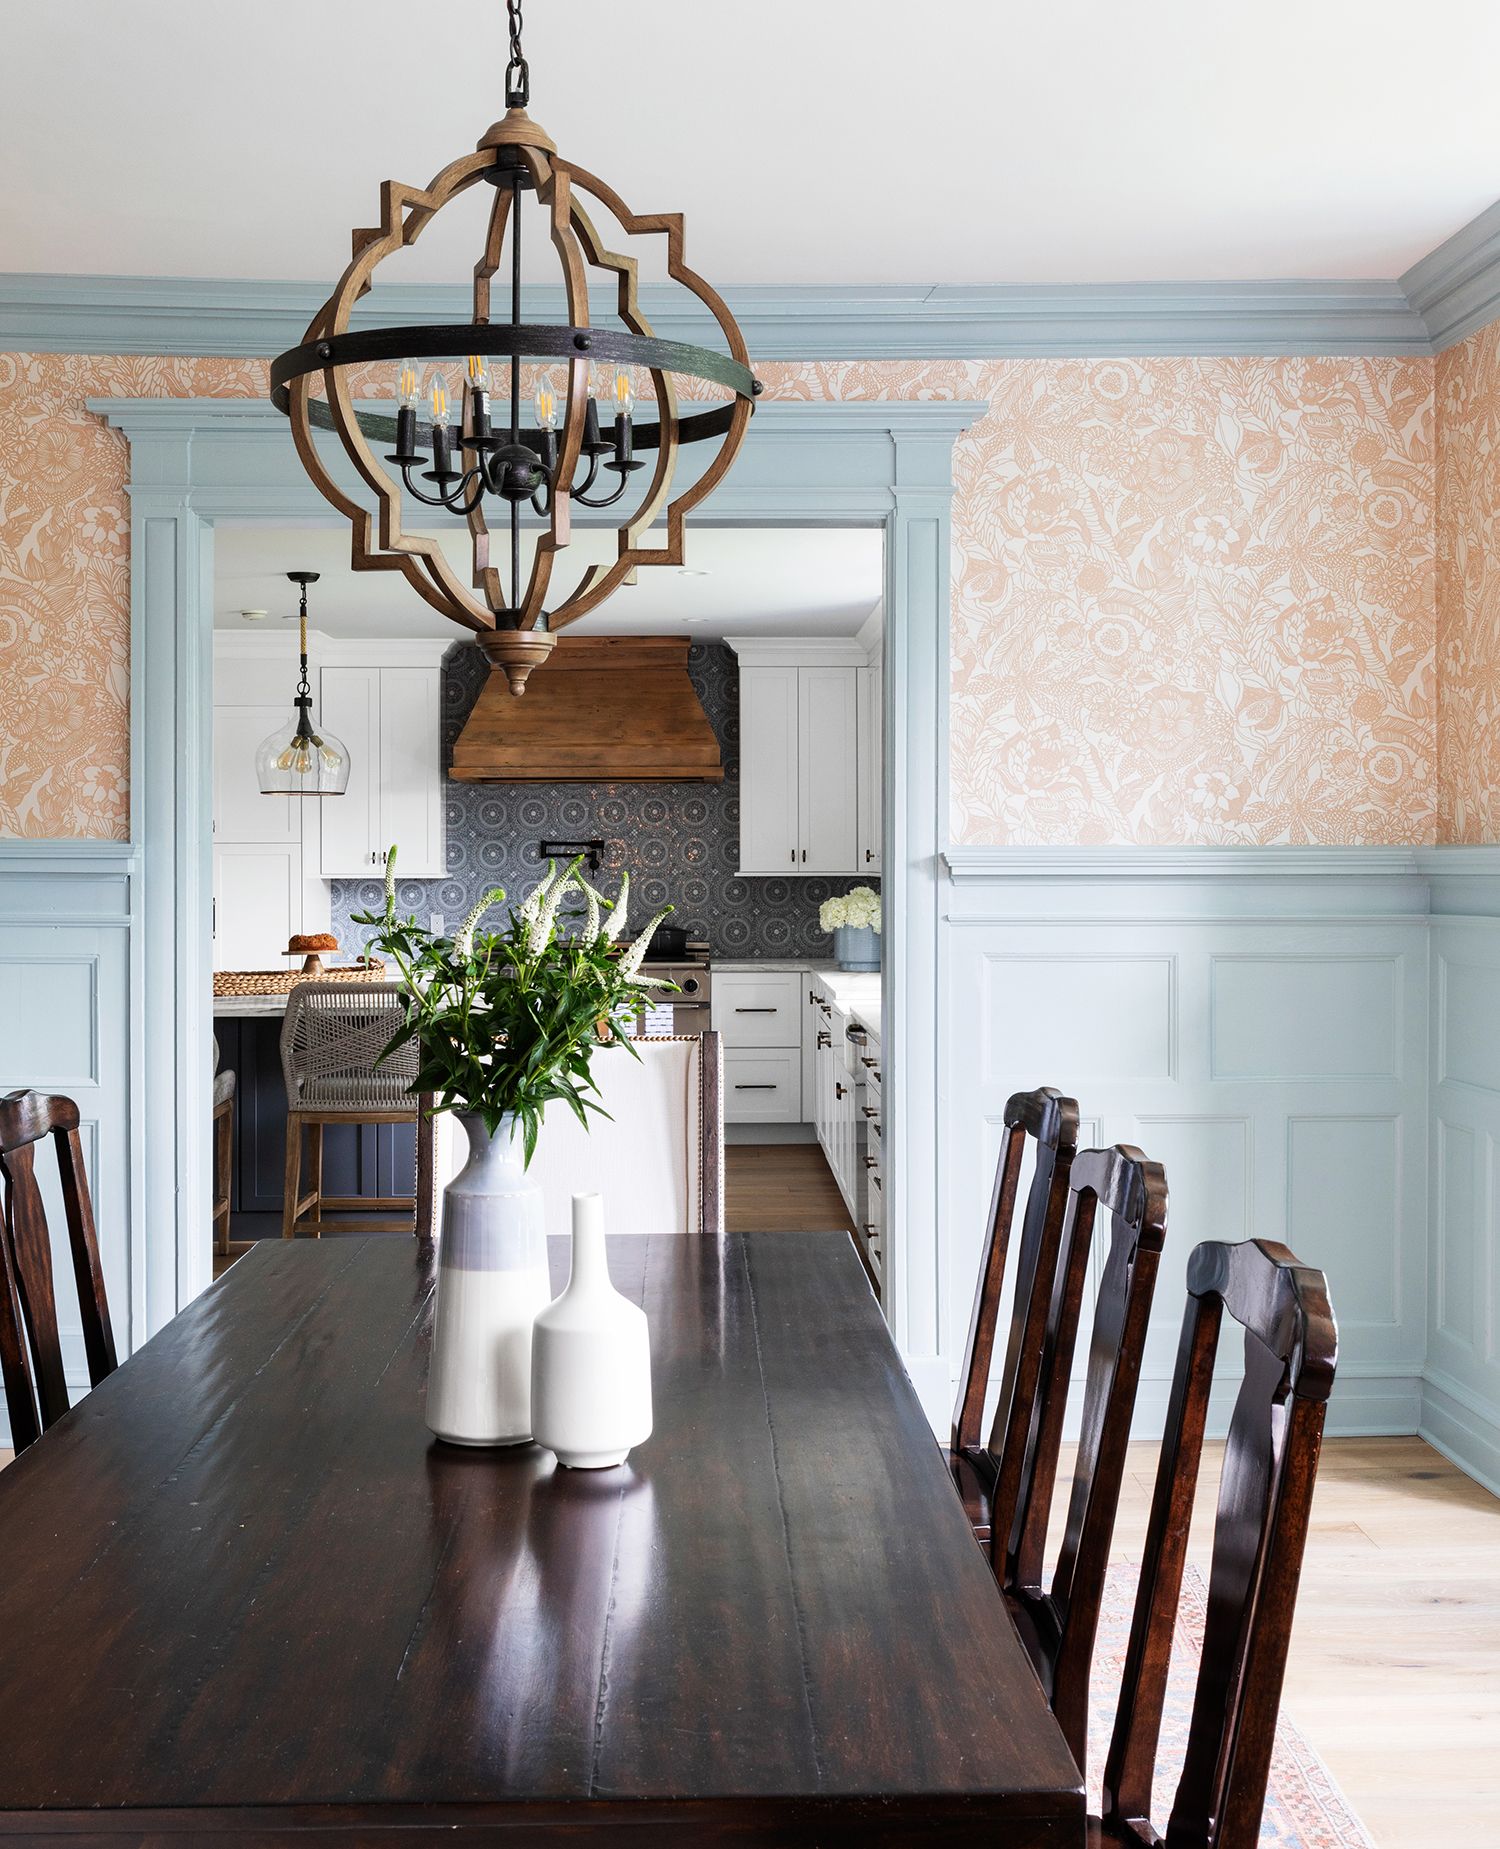 How to Decorate a Dining Room Table 